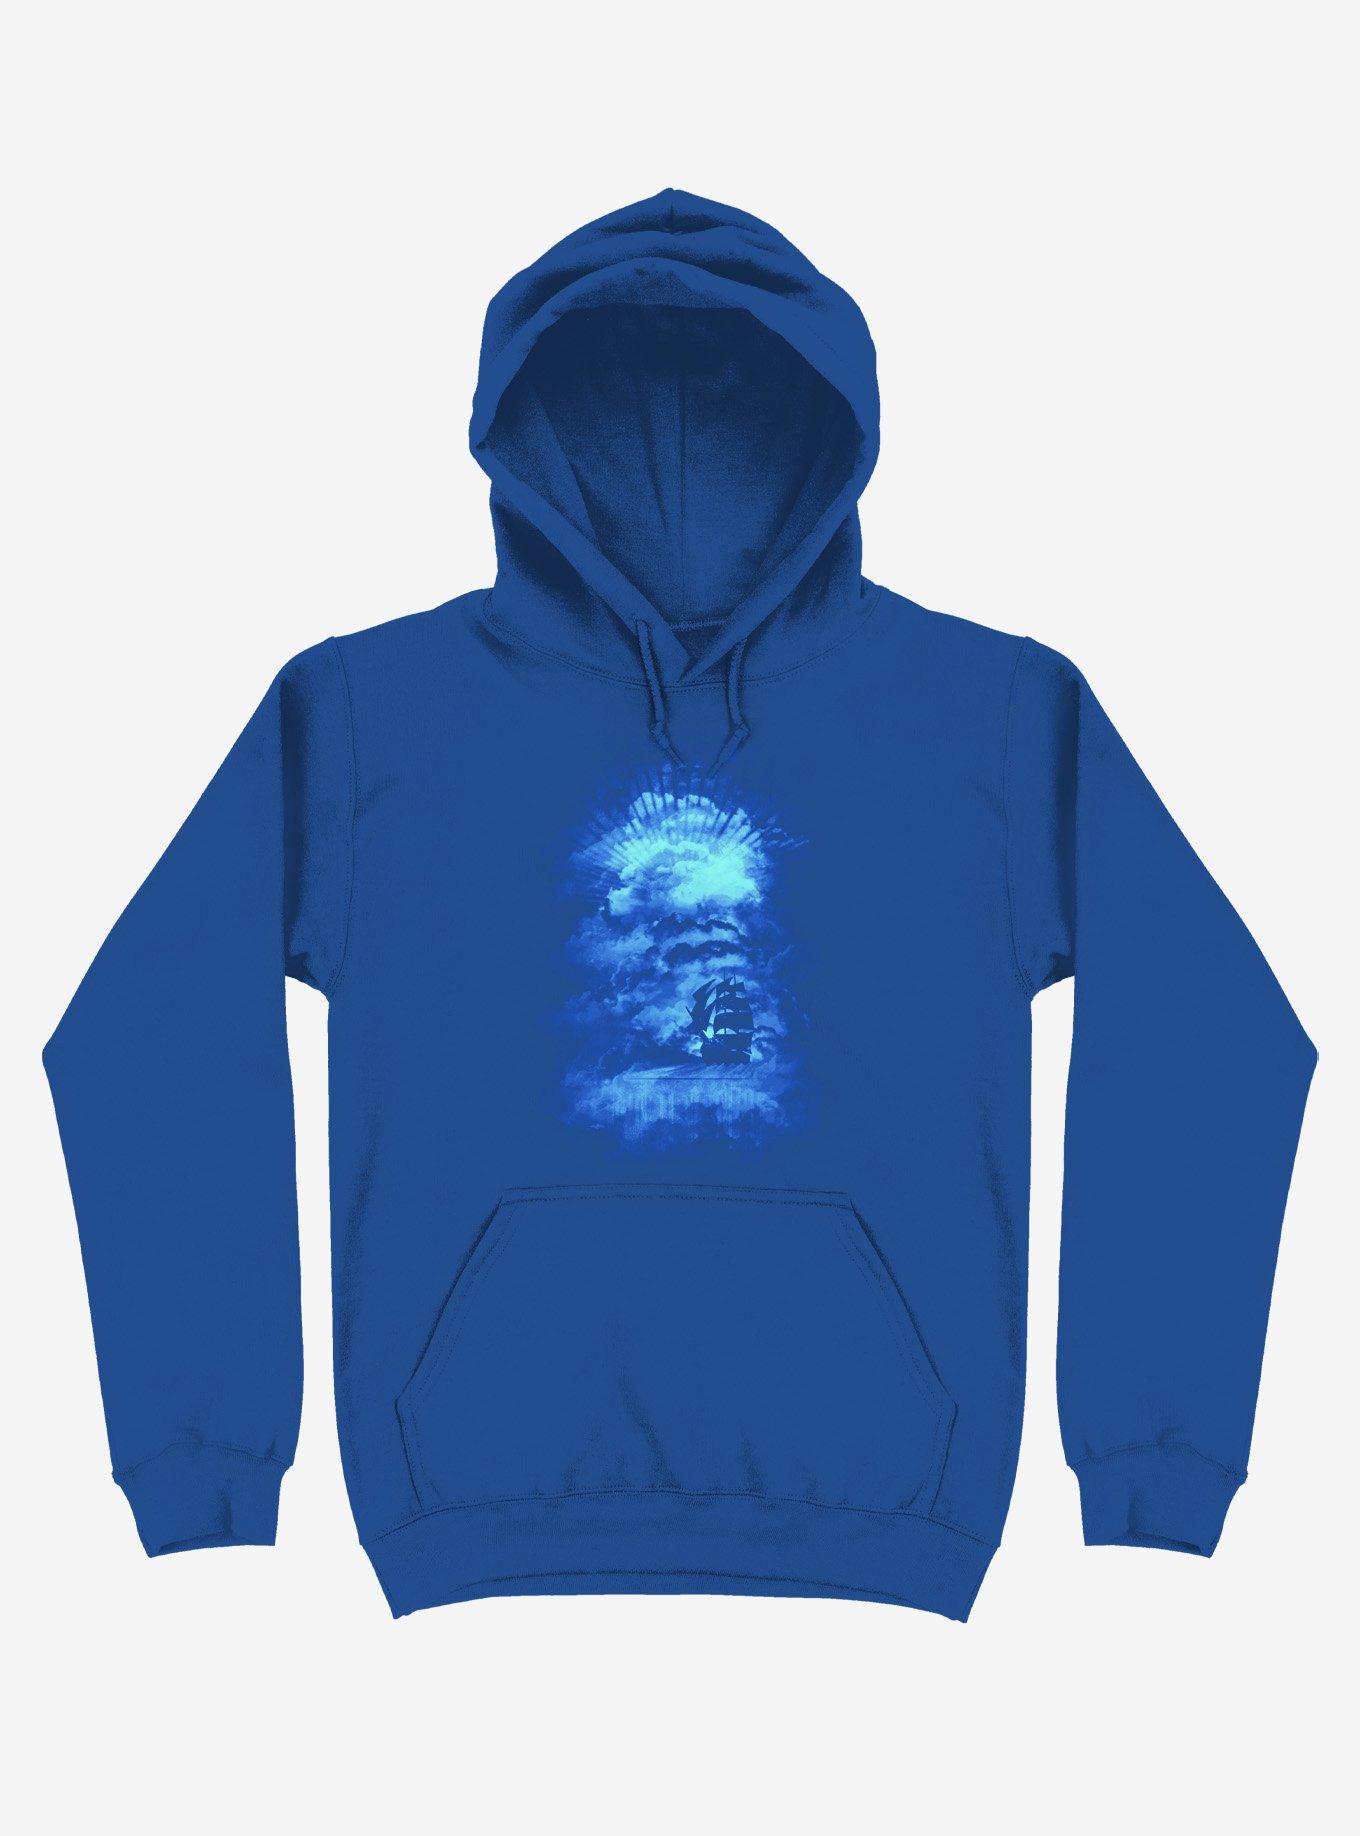 Ship Sailing To The End Of The Bright World Royal Blue Hoodie, ROYAL, hi-res